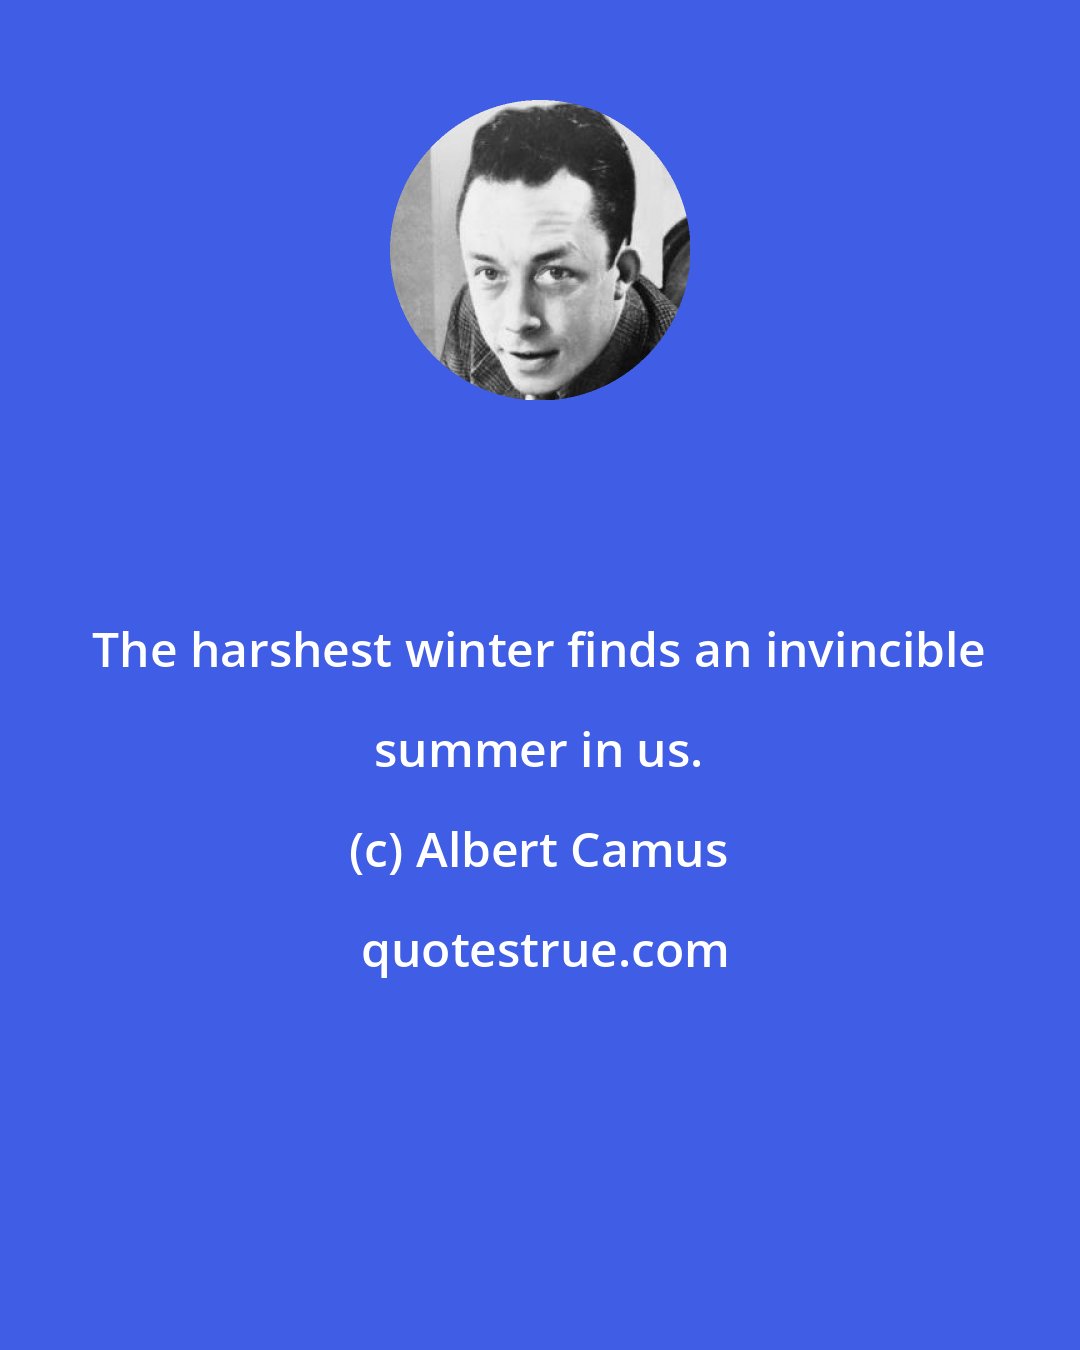 Albert Camus: The harshest winter finds an invincible summer in us.